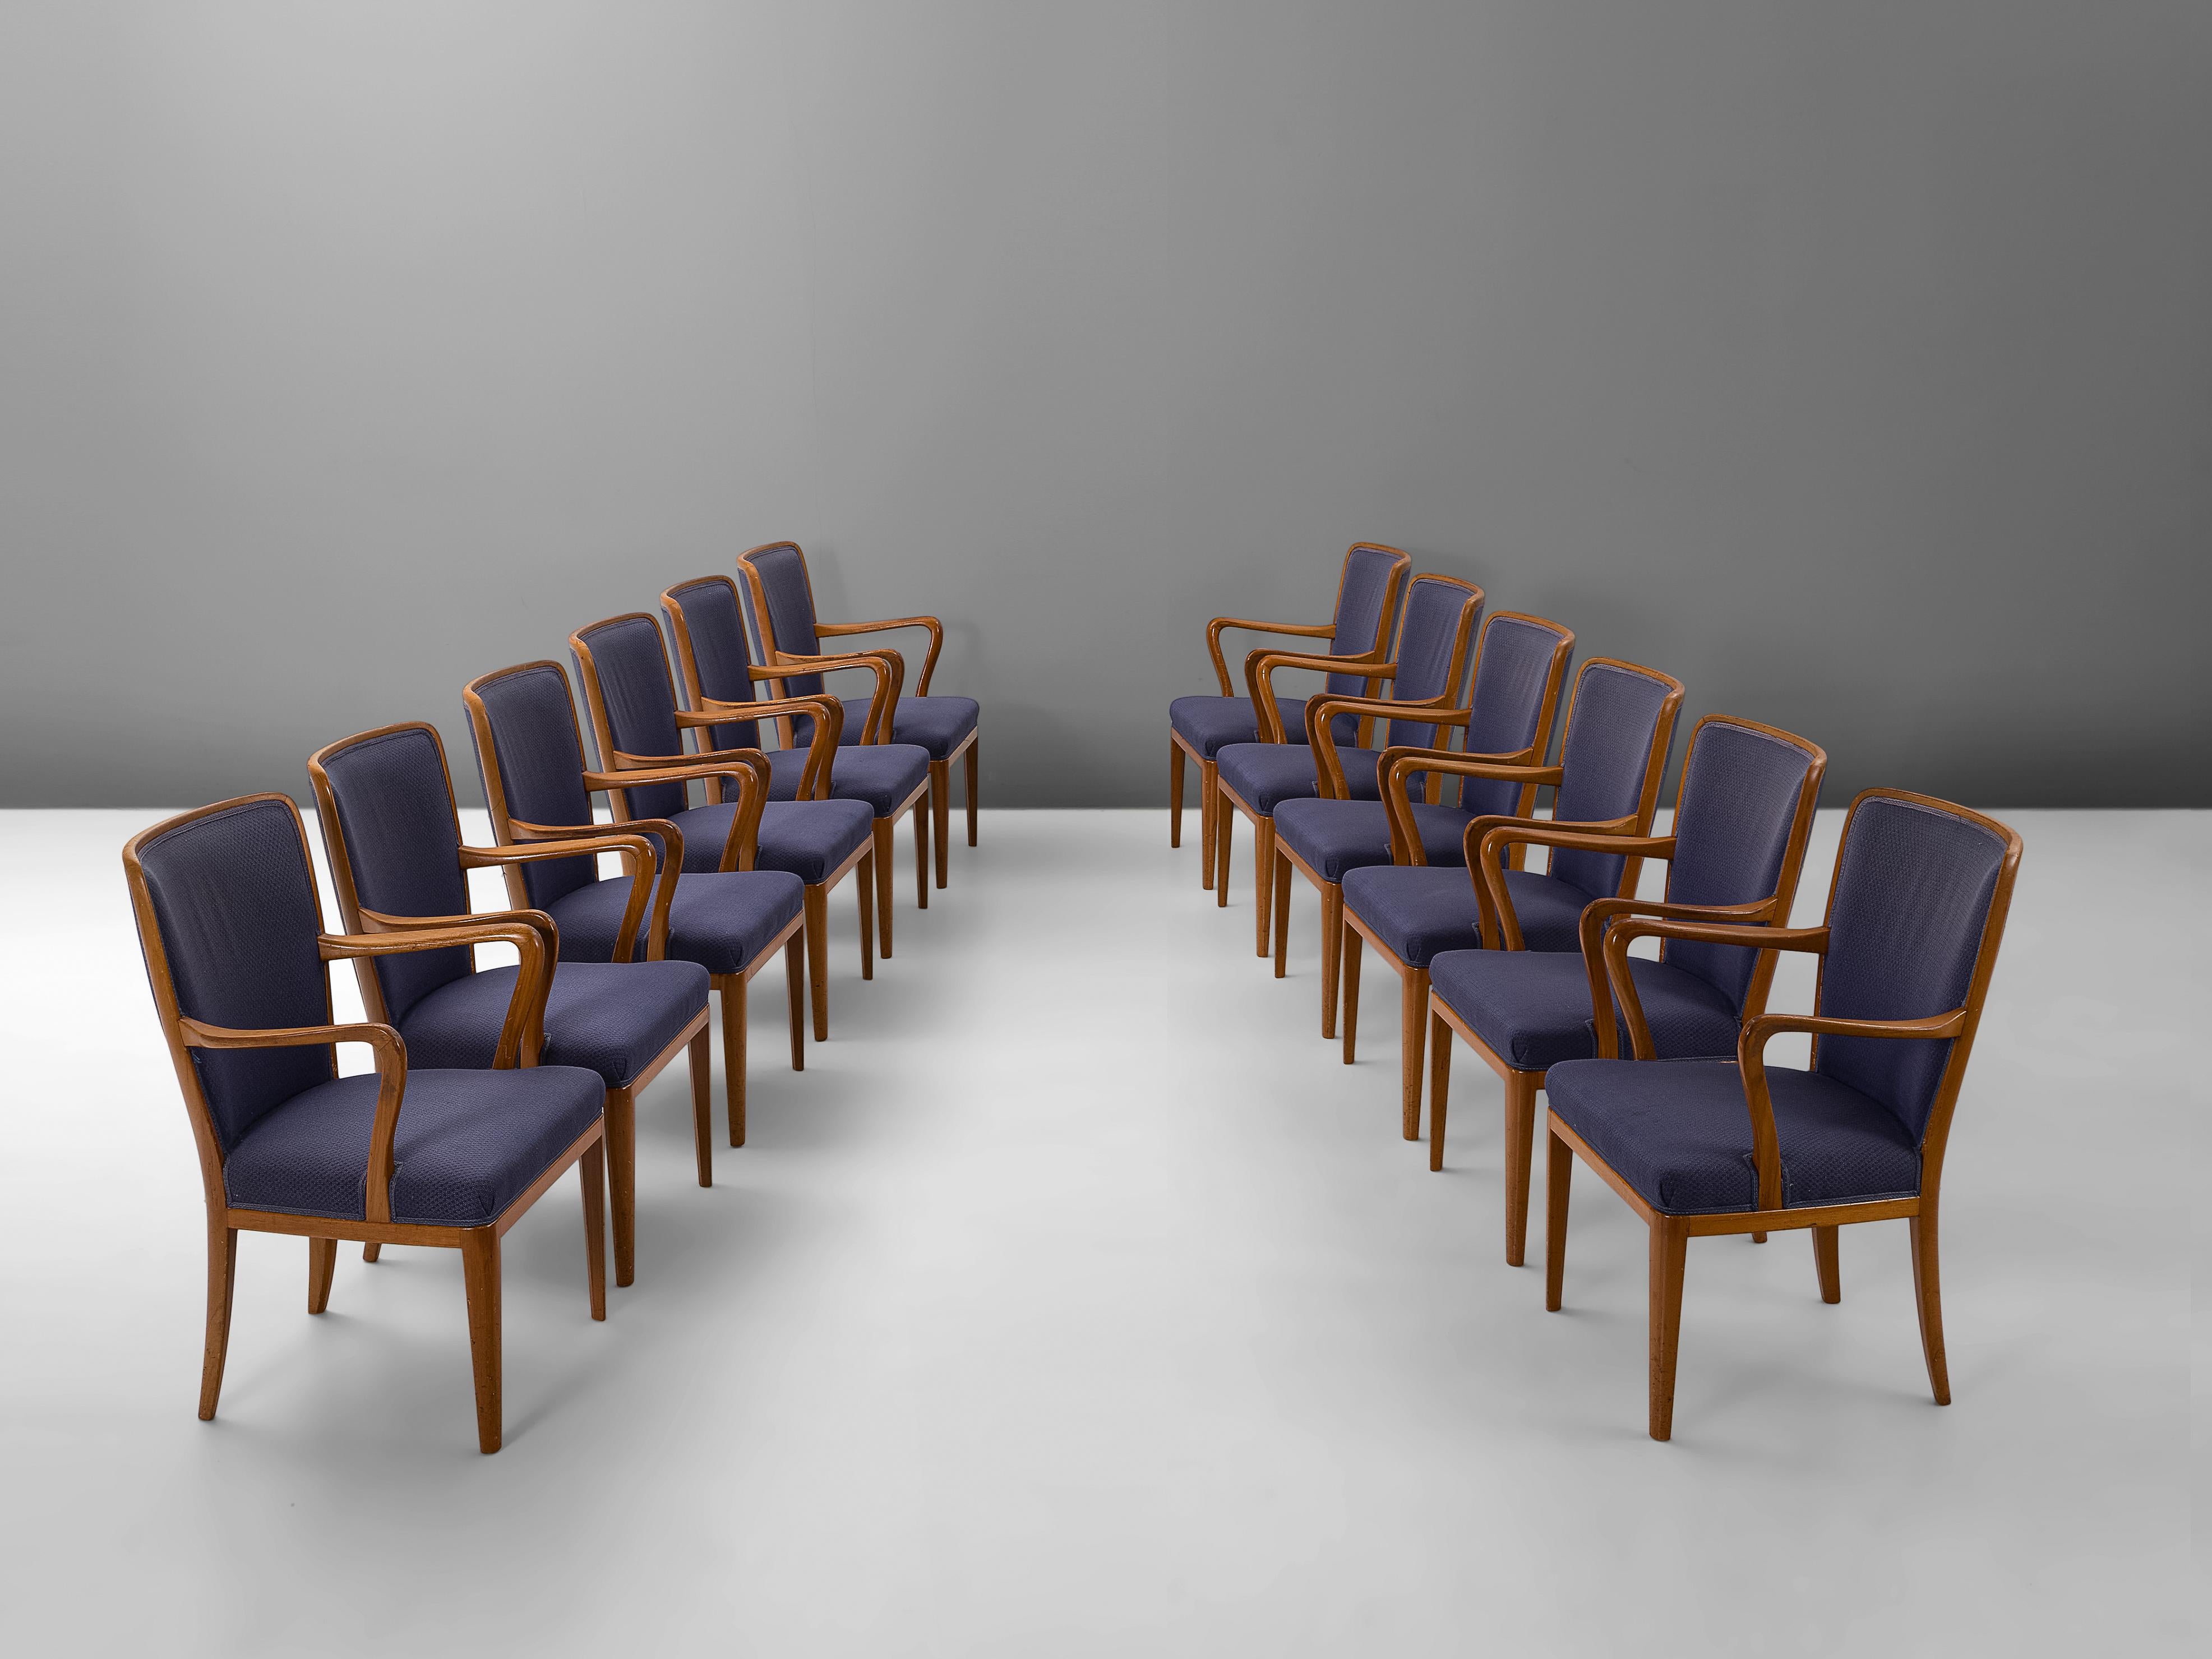 Set of twelve armchairs, in teak and fabric, attributed to Carl Malmsten, Sweden, 1950s.

Set of twelve chairs in deep blue upholstery is attributed to Carl Malmsten (1888-1972). The unique lines and curves of the design are striking and the tapered